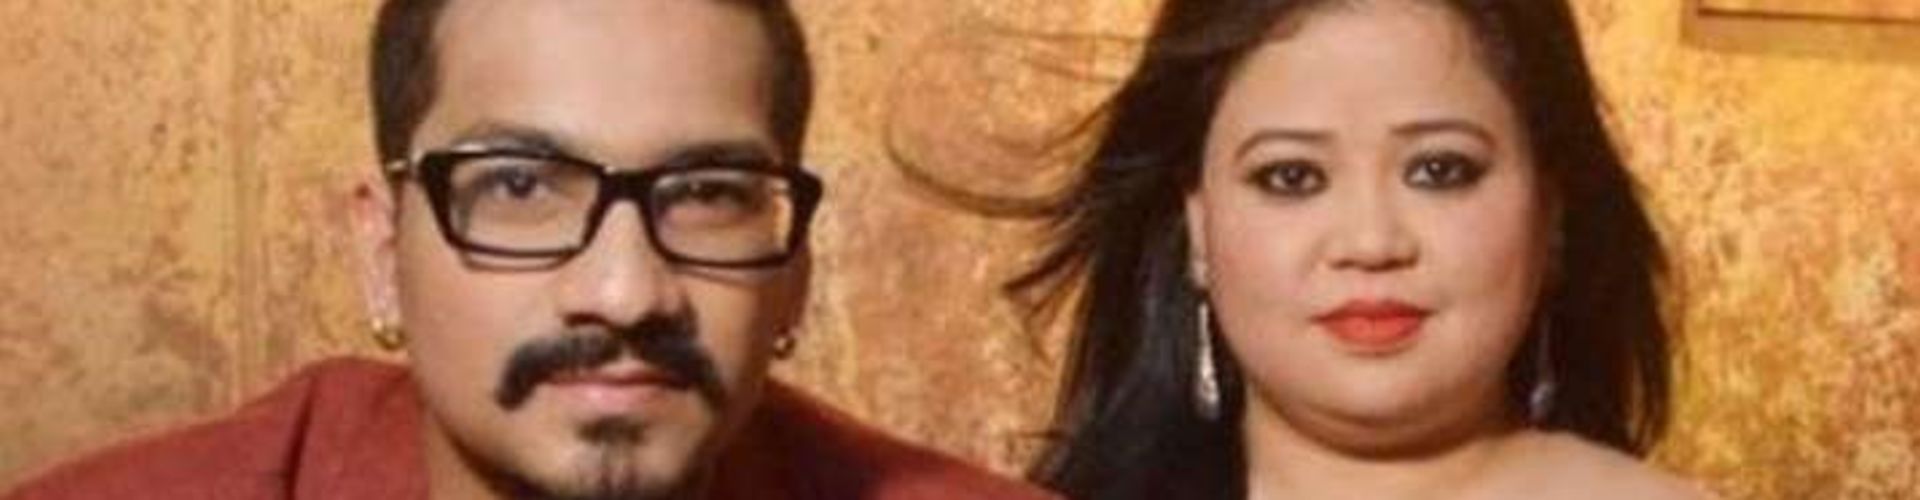 Bharti Singh And Harsh Being Questioned By Anti-Drugs Agency After Raid